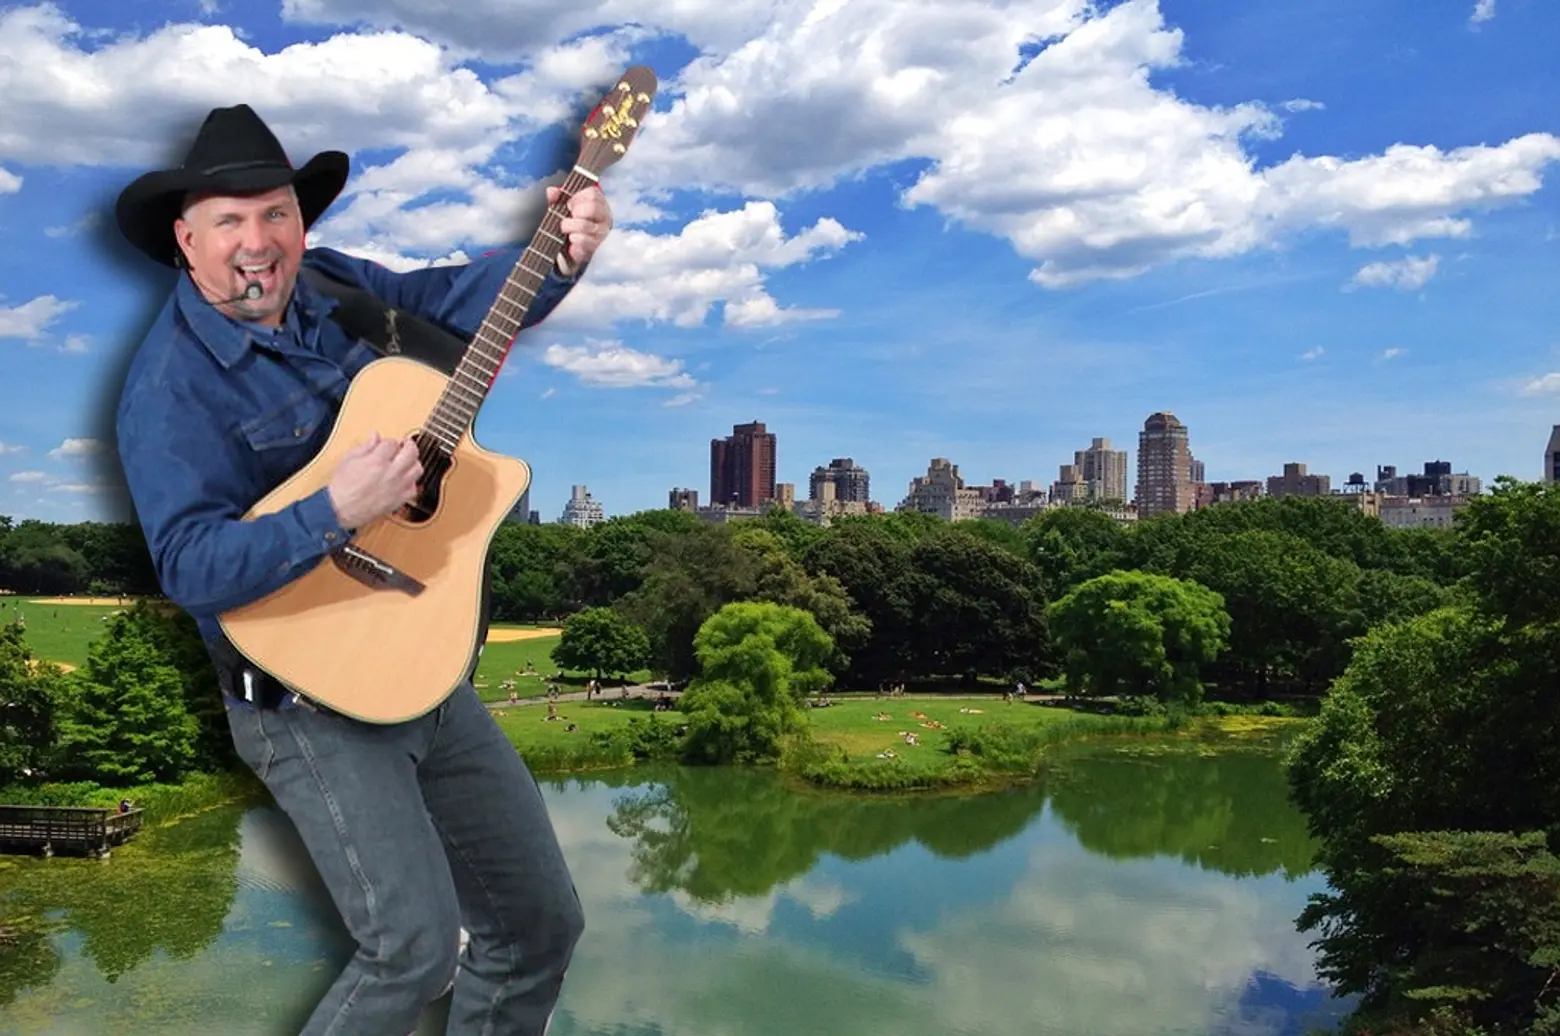 Why Central Park hasn’t had a six-figure crowd since Garth Brooks’ concert 20 years ago